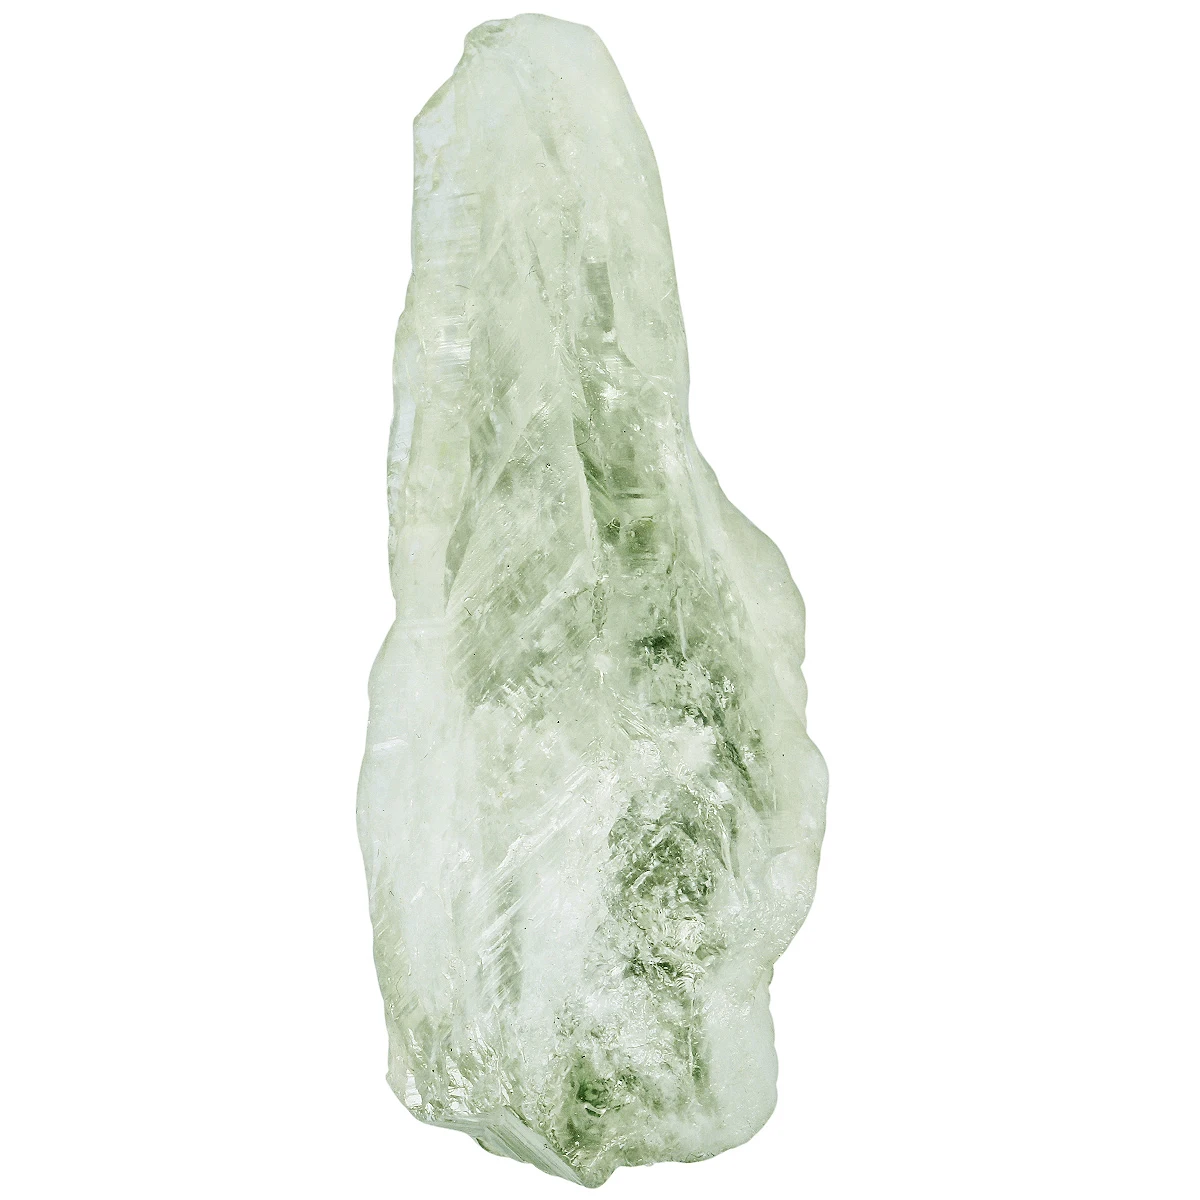 1Pc Irregular Green Crystal Quartz Point Wand Healing Rough Stone Minerals Specimen For Home Decor DIY Jewelry Accessories 10 50g natural rough malachite minerals healing gemstone specimen irregular stone ornaments for home decor